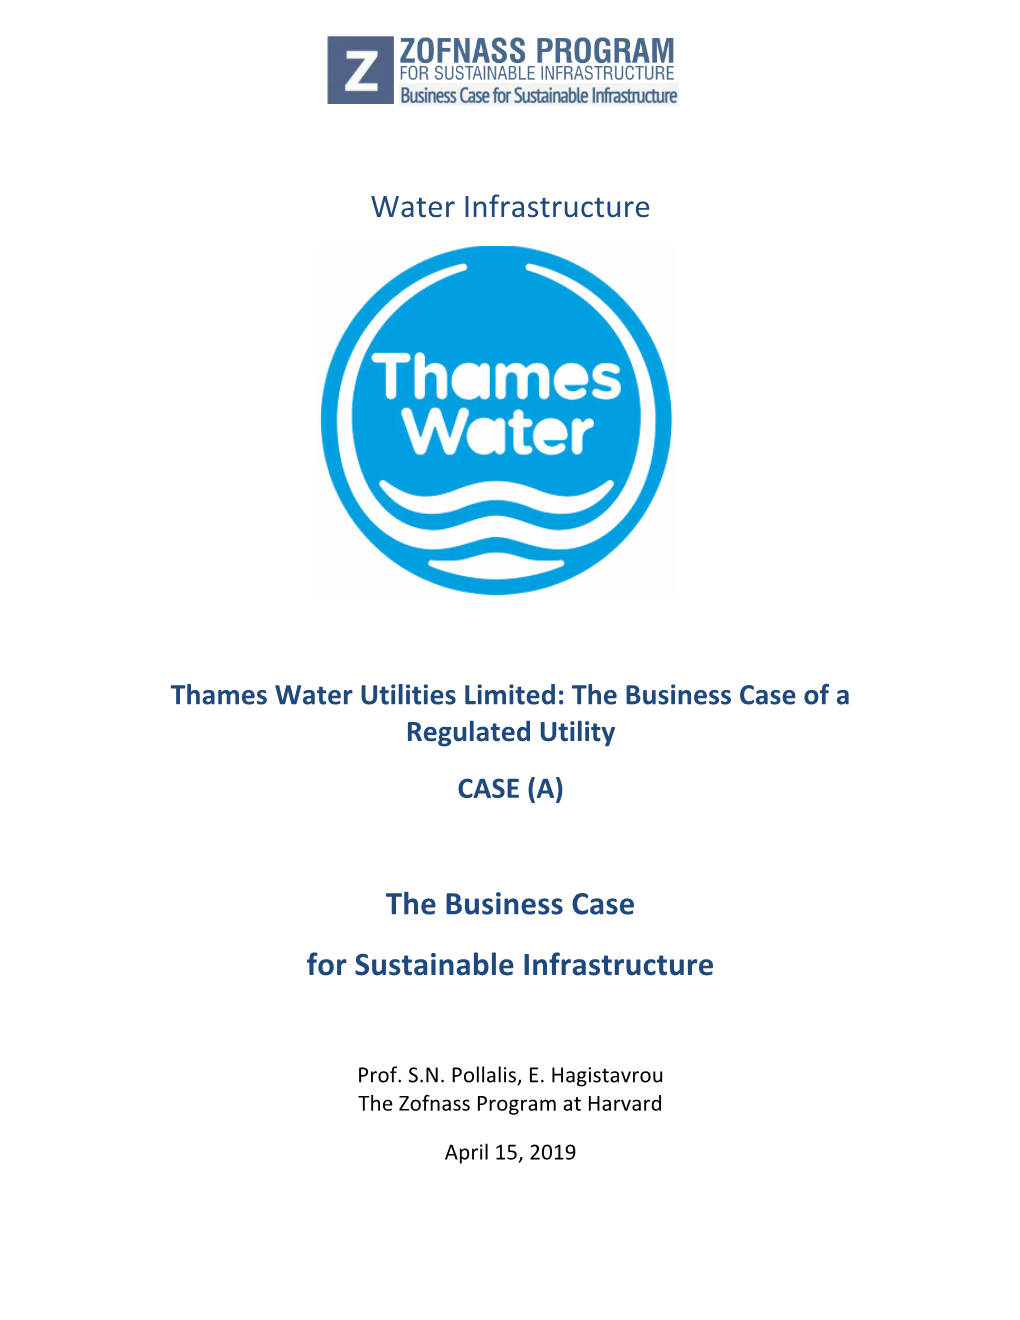 Thames Water.48 This Is a Pricing Impact That Demonstrates the Commitment to Sustainable Performance